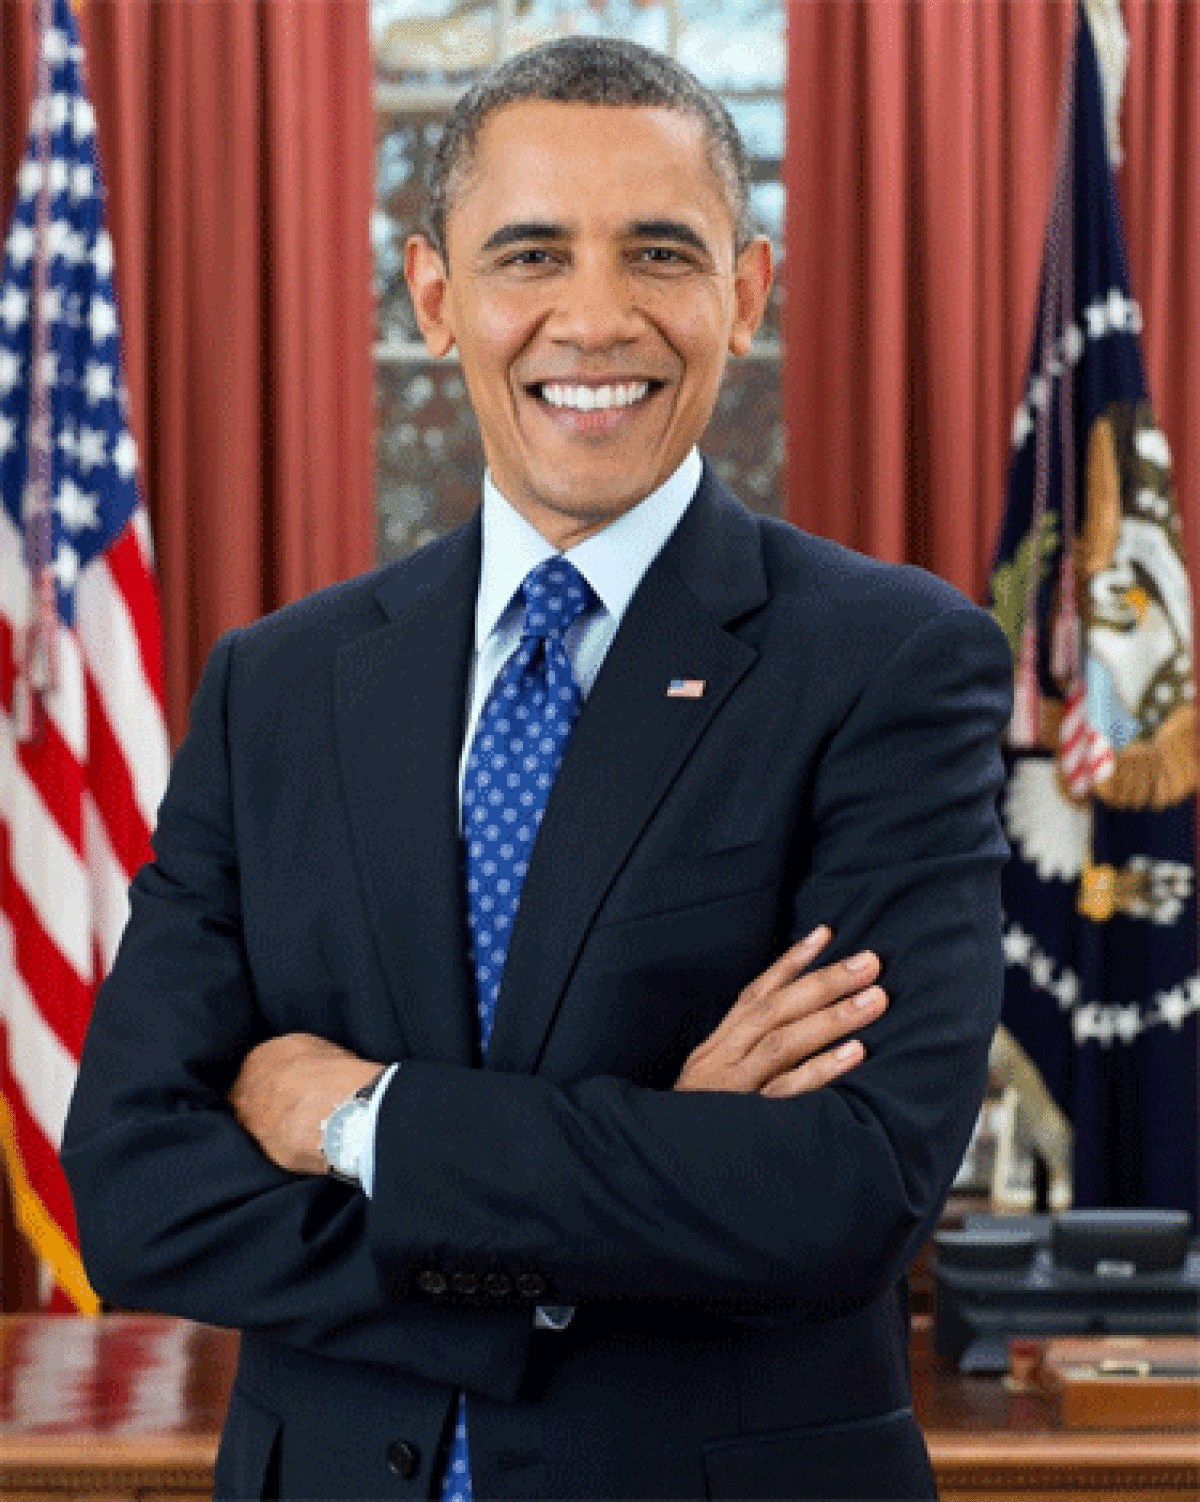 President Obama is seen in the Oval Office in this official portrait taken on Dec. 6, 2012.